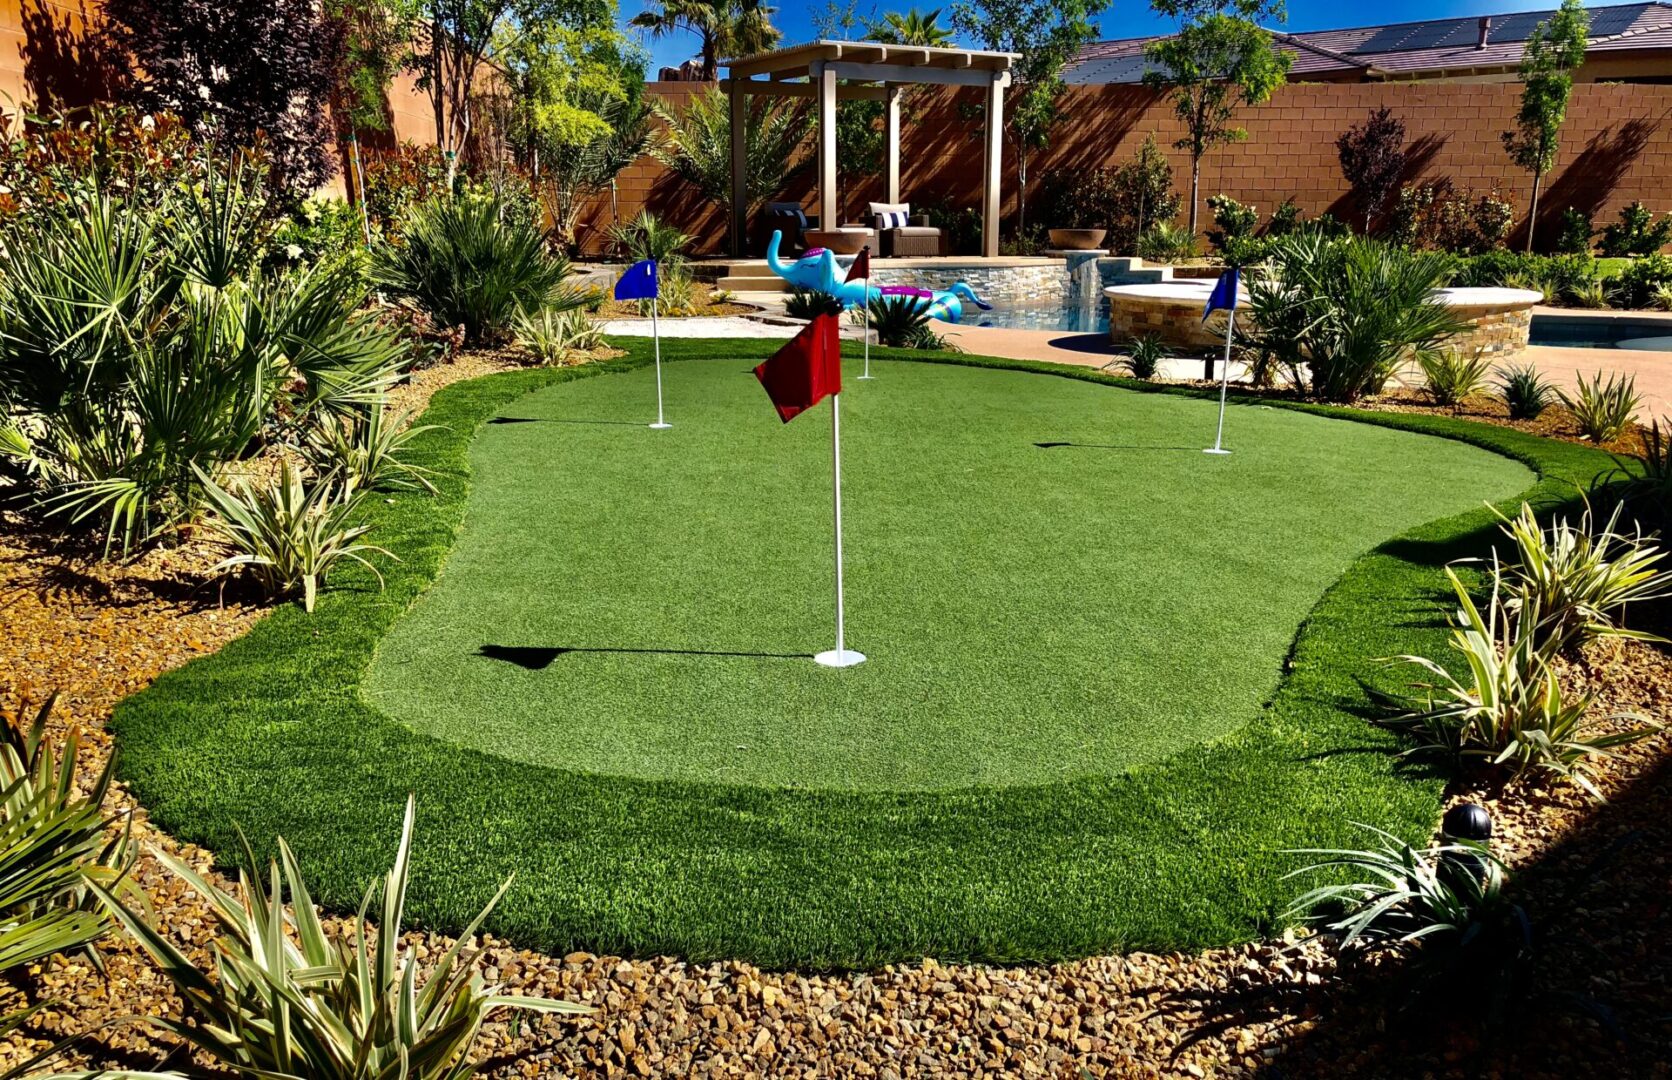 A backyard with a putting green and pool.